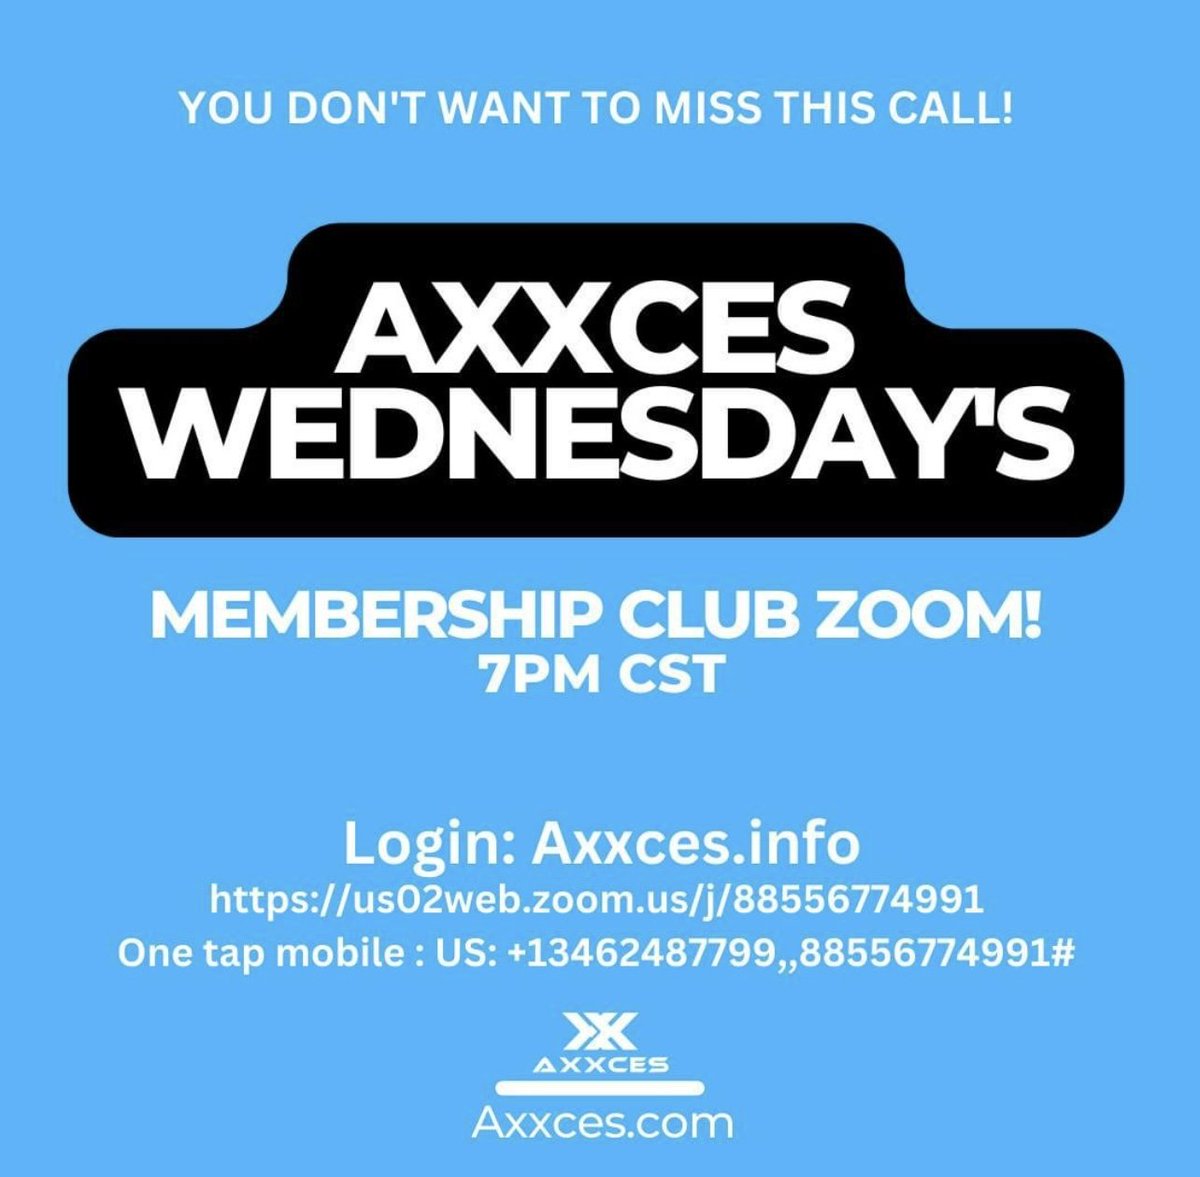 Please join me to learn about this amazing opportunity!

#younowhaveaxxces #servantleadership #membershiphasitsprivileges
#letsworktogether